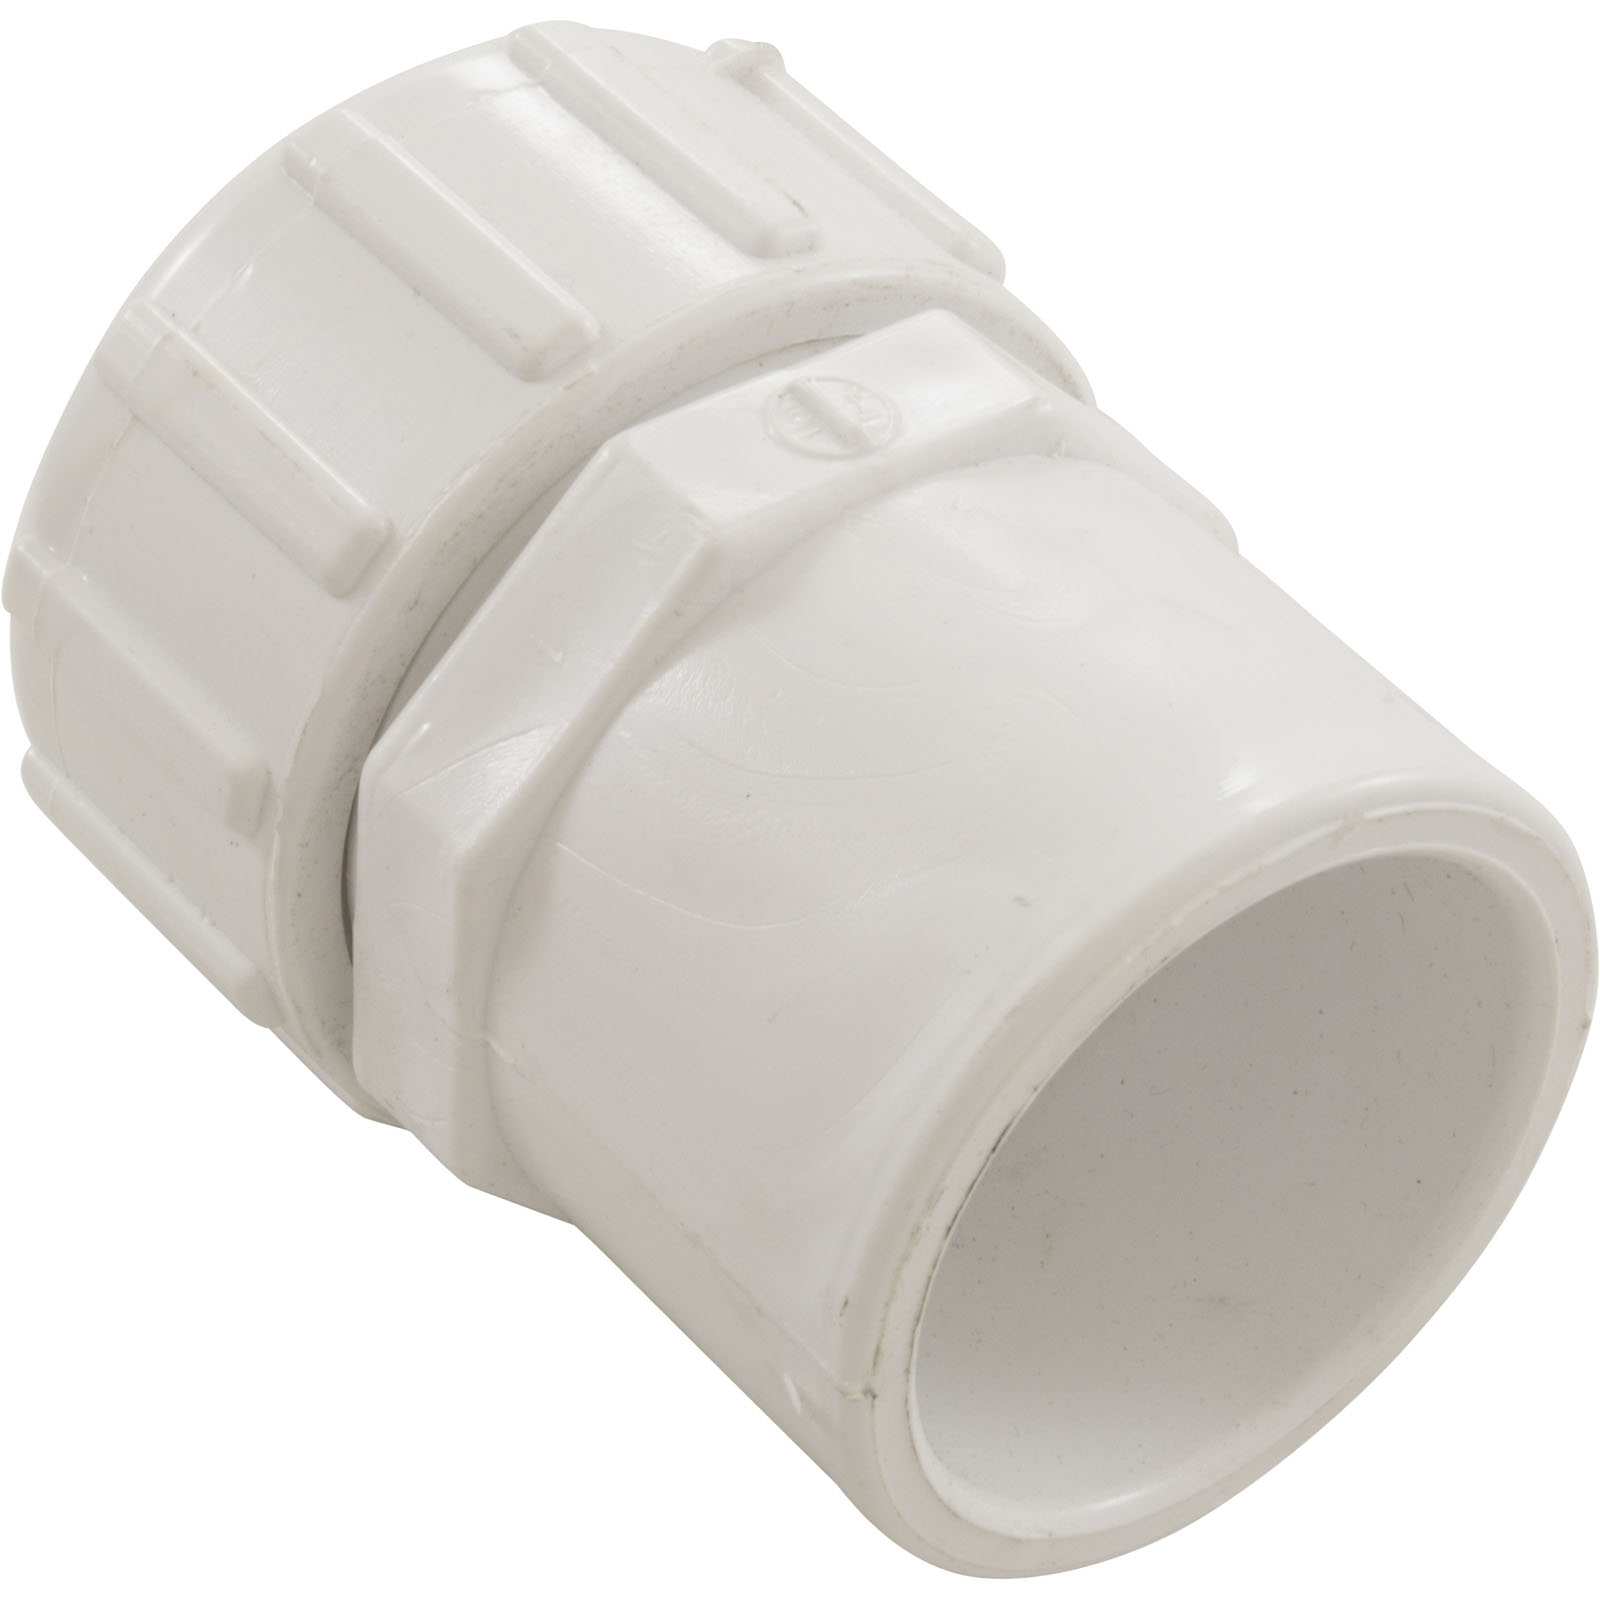 Picture of 935-15 Male Adapter Flo Control Flo Lock 1-1/2"s x 4" CTS PVC